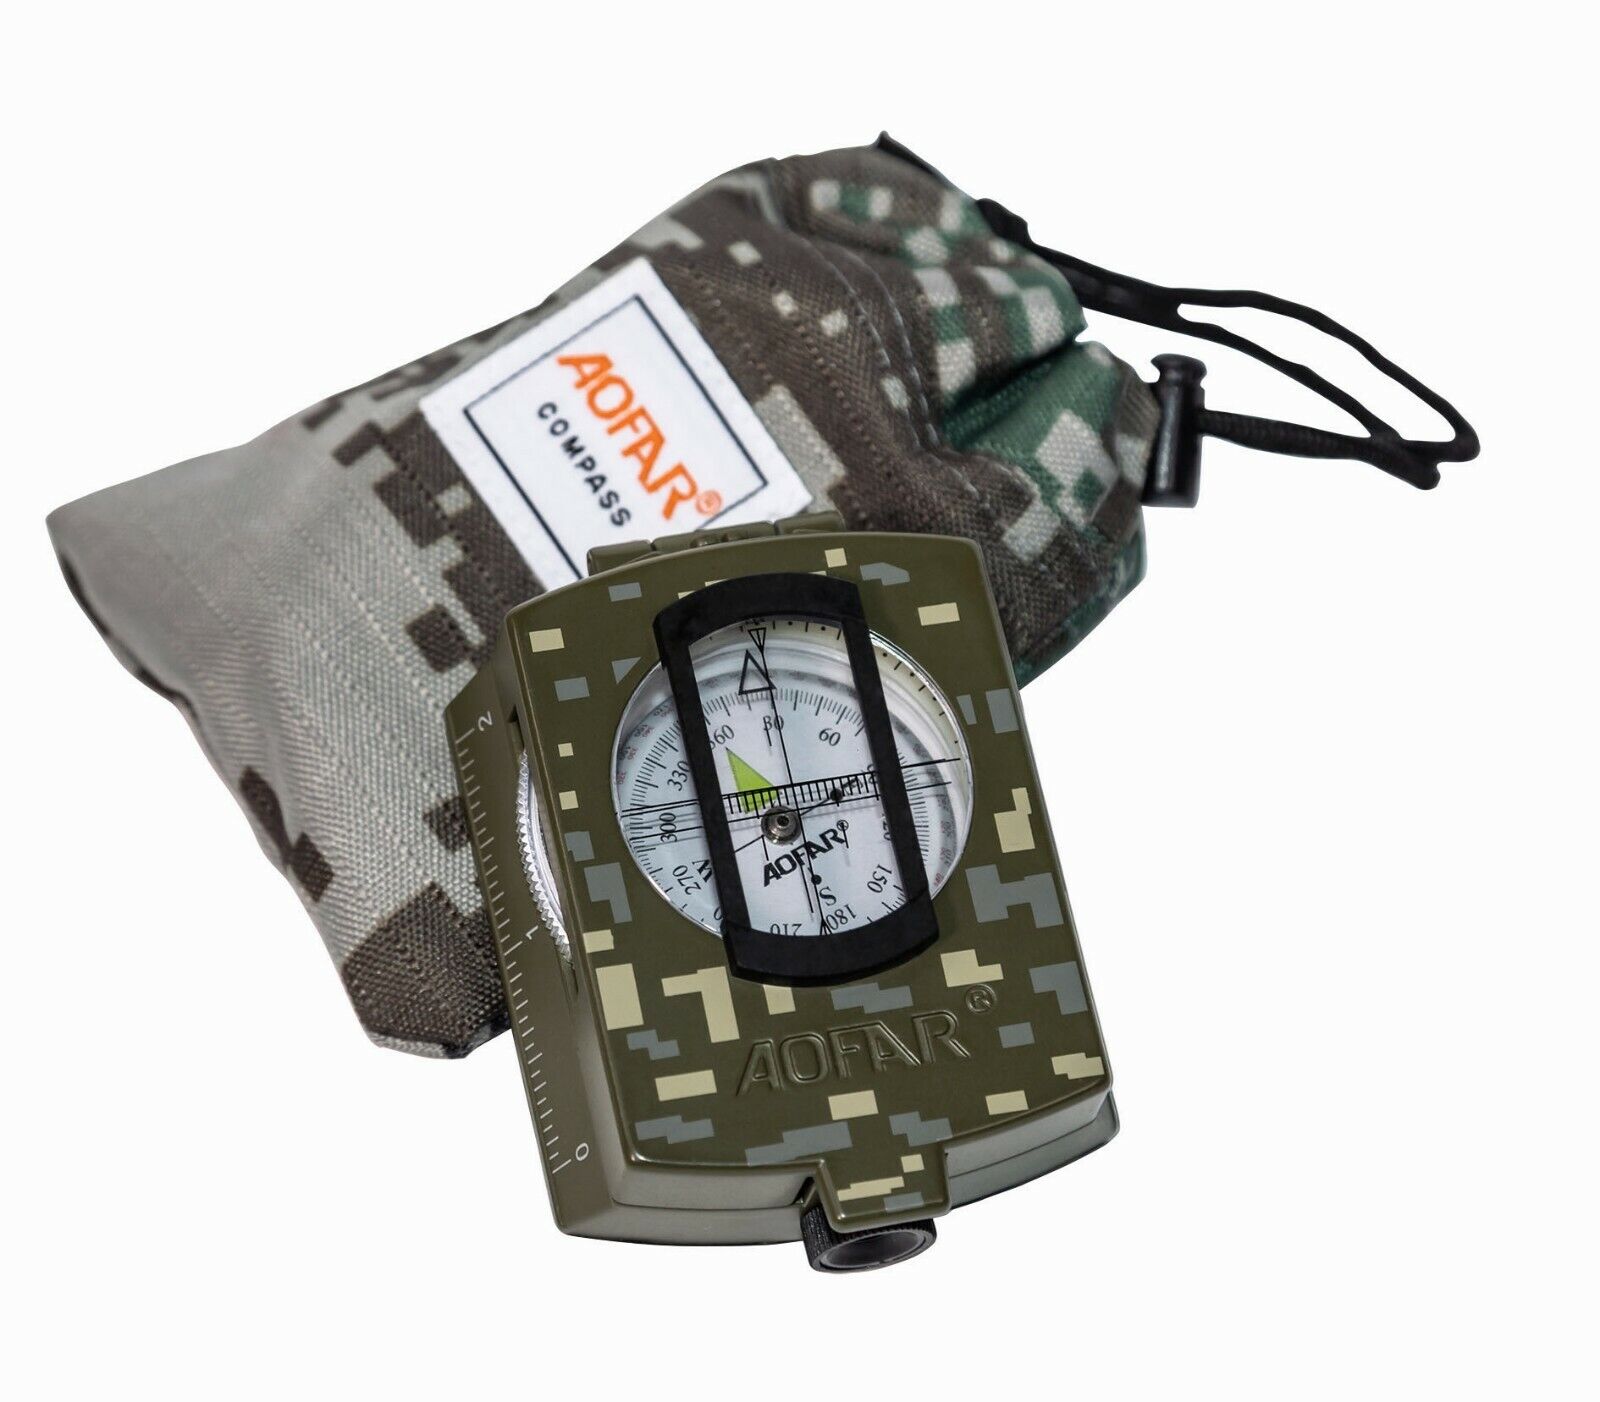 AOFAR Military Lensatic Compass for Camping/Hiking